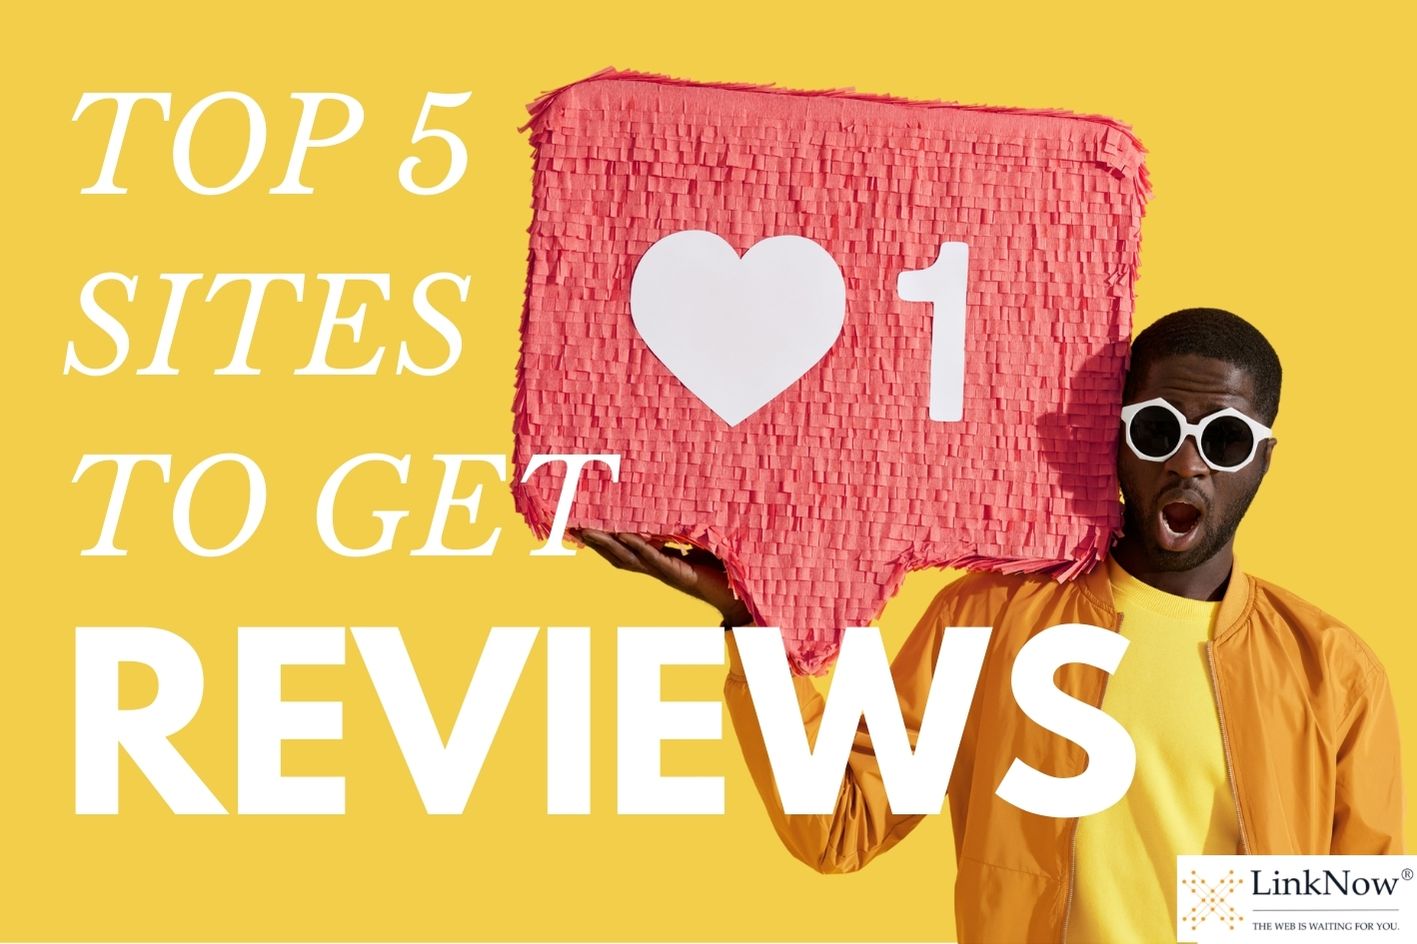 Man holding a heart sign. Text says: Top 5 sites to get reviews.